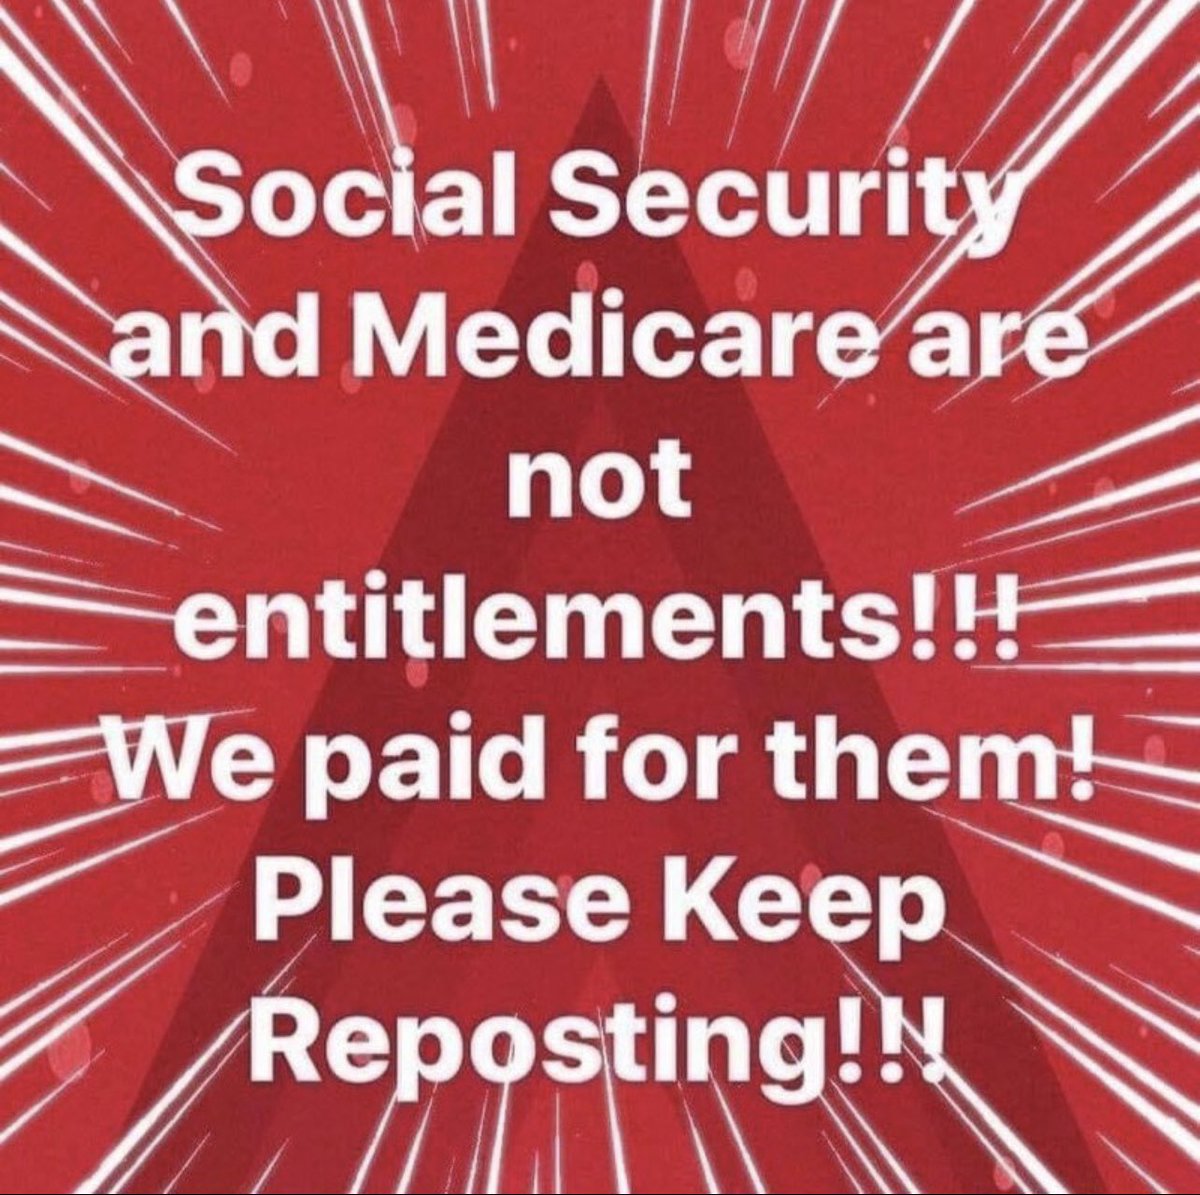 Social Security and Medicare are not entitlements! It’s our hard earned money paying for it ! Yet they are giving it away for free to Illegals who never paid a dime into it. It’s backwards! Who gets kissed just thinking about it? 🙋‍♂️